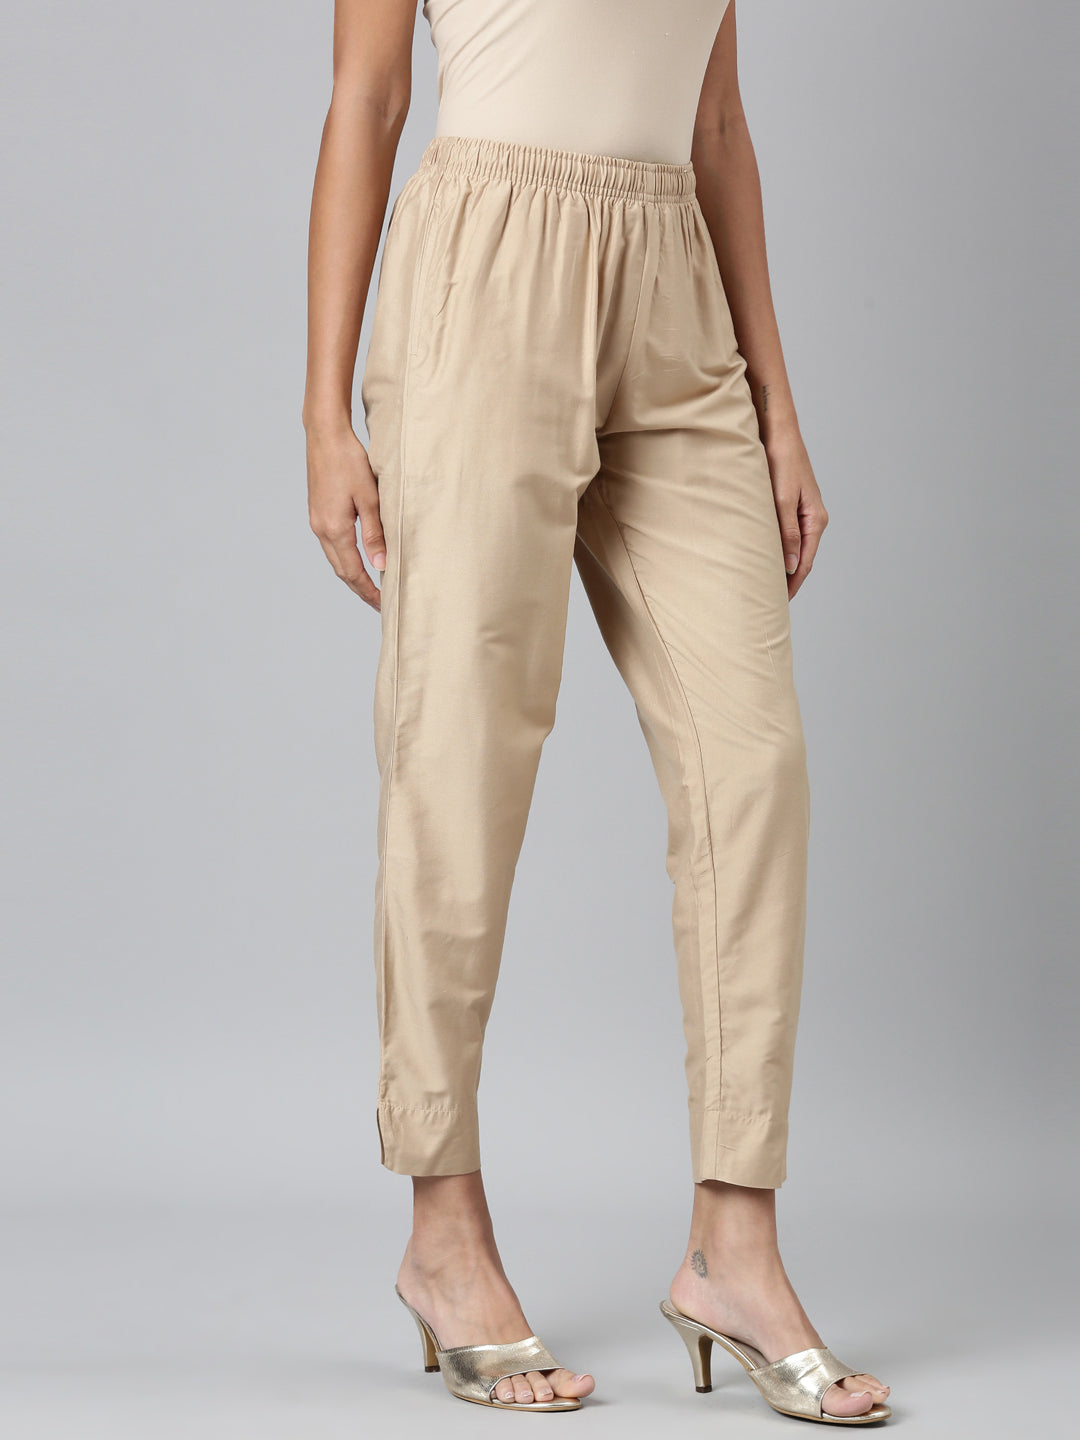 Go Colors Women Solid Mid Rise Metallic Pants  Beige Buy Go Colors Women  Solid Mid Rise Metallic Pants  Beige Online at Best Price in India  Nykaa